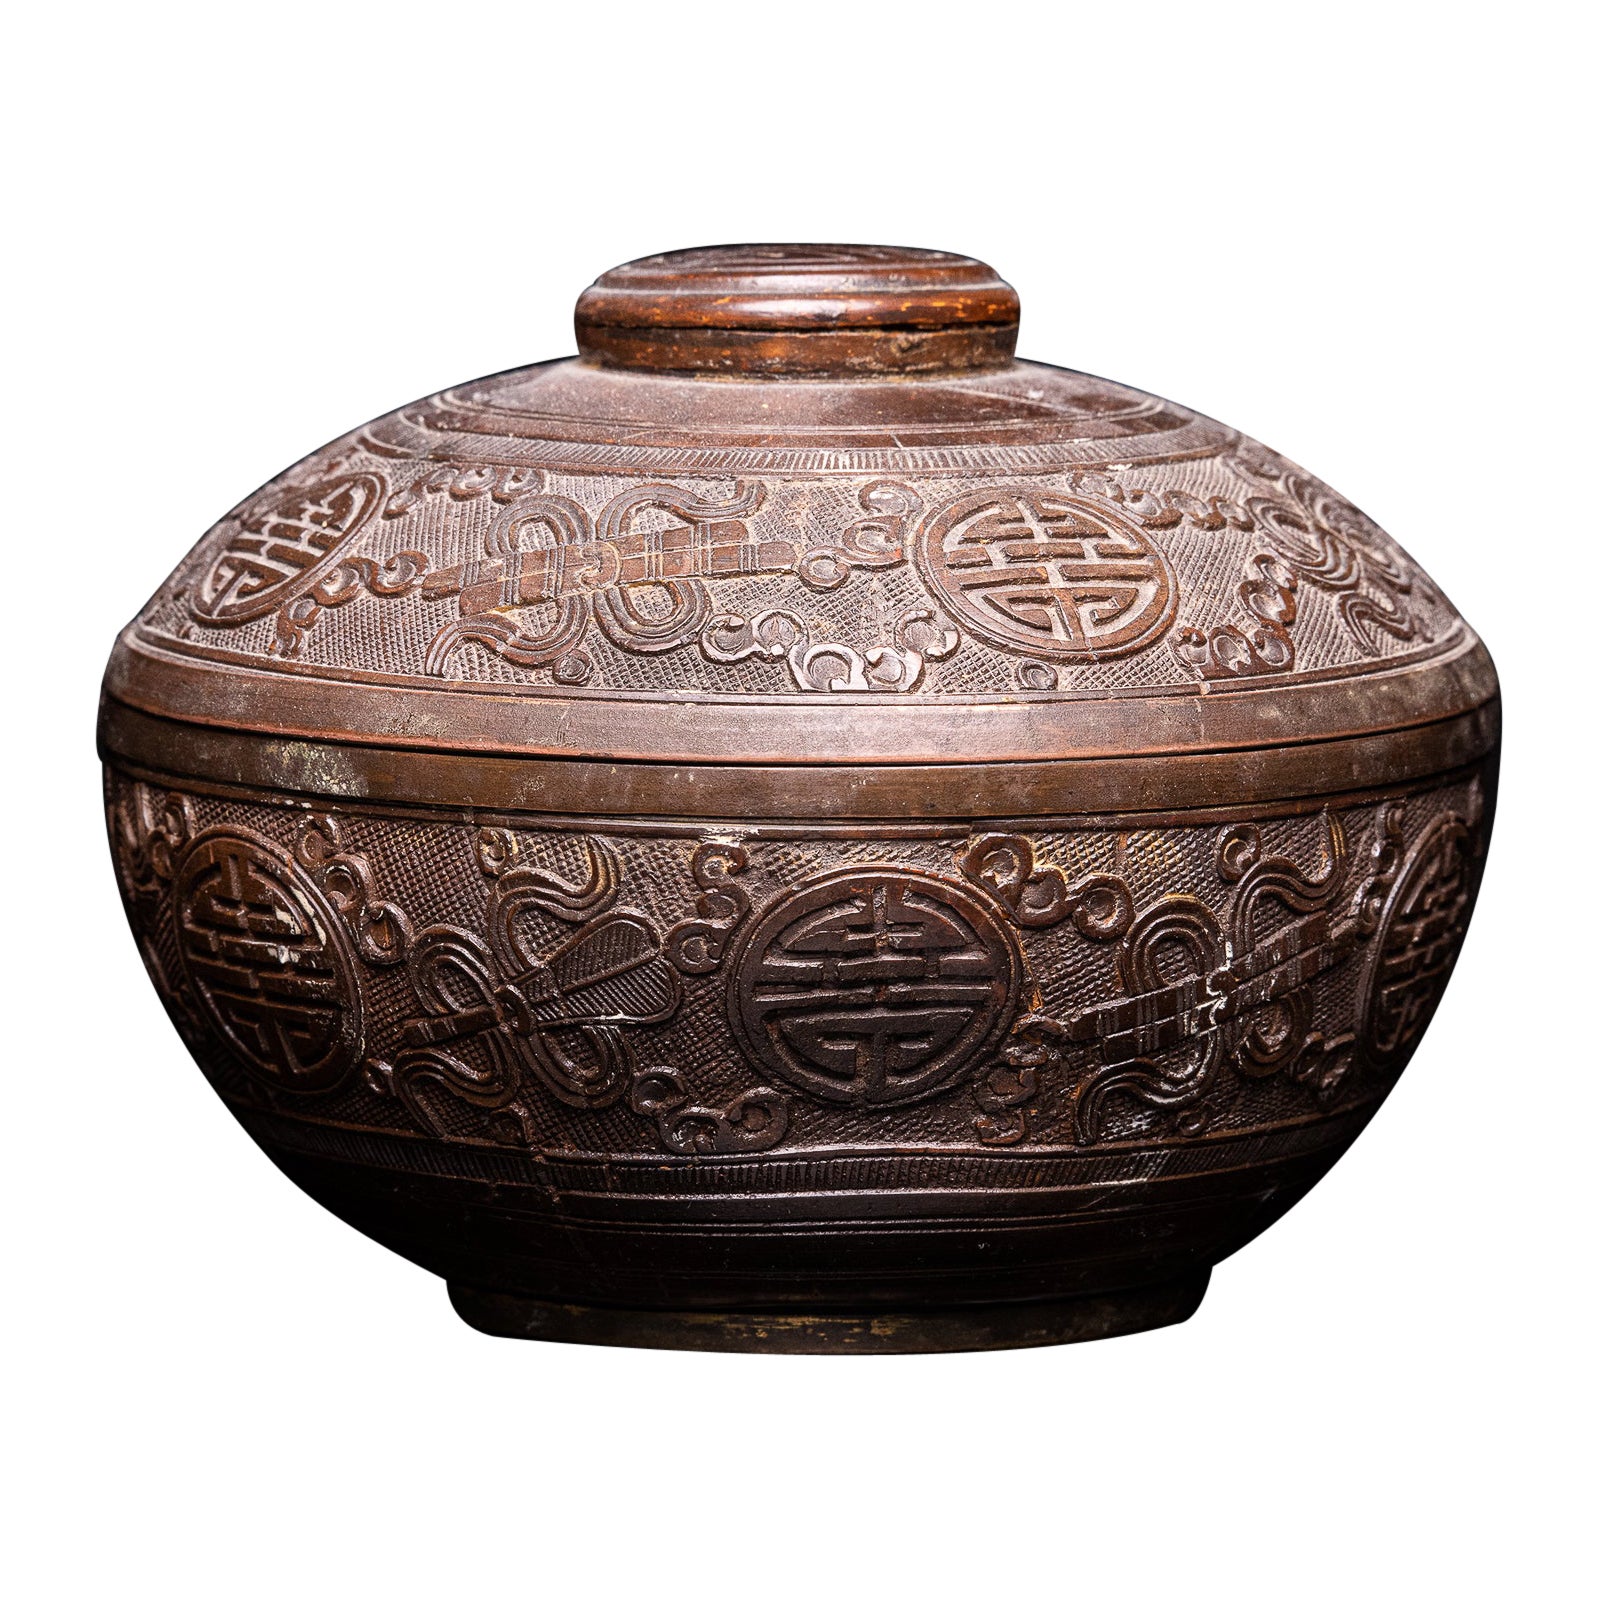 Antique Asian Decorated Storage Bowl with Lid, Carved Out of Coconut Shell China